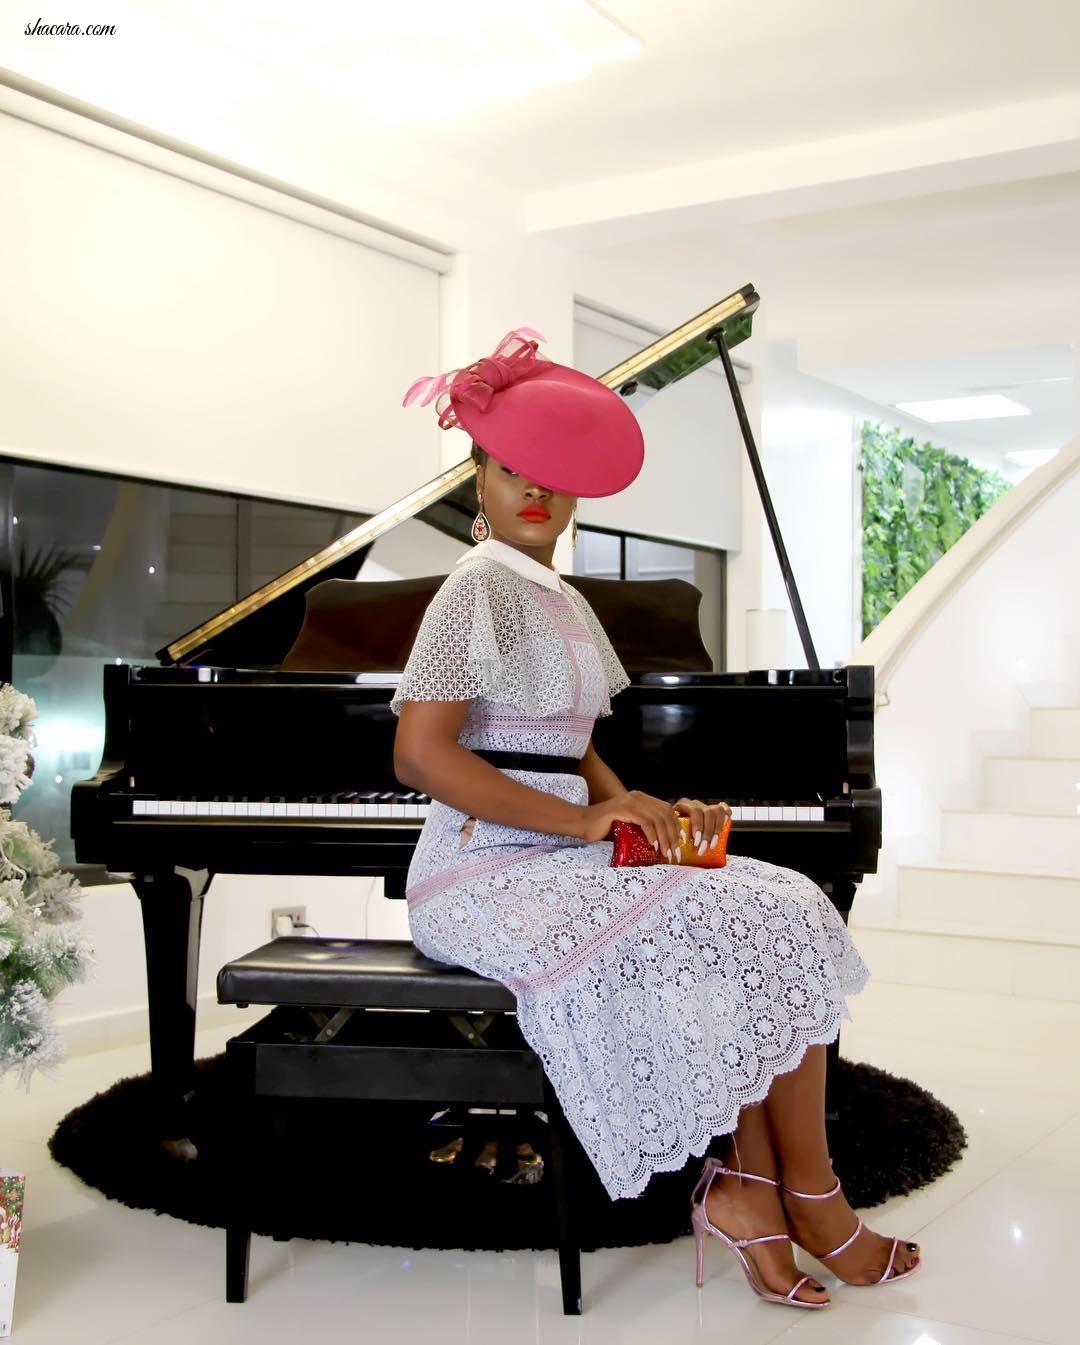 Debutante Chic! Alex Unusual Masters Victorian Style In A Fascinator And Lace Dress